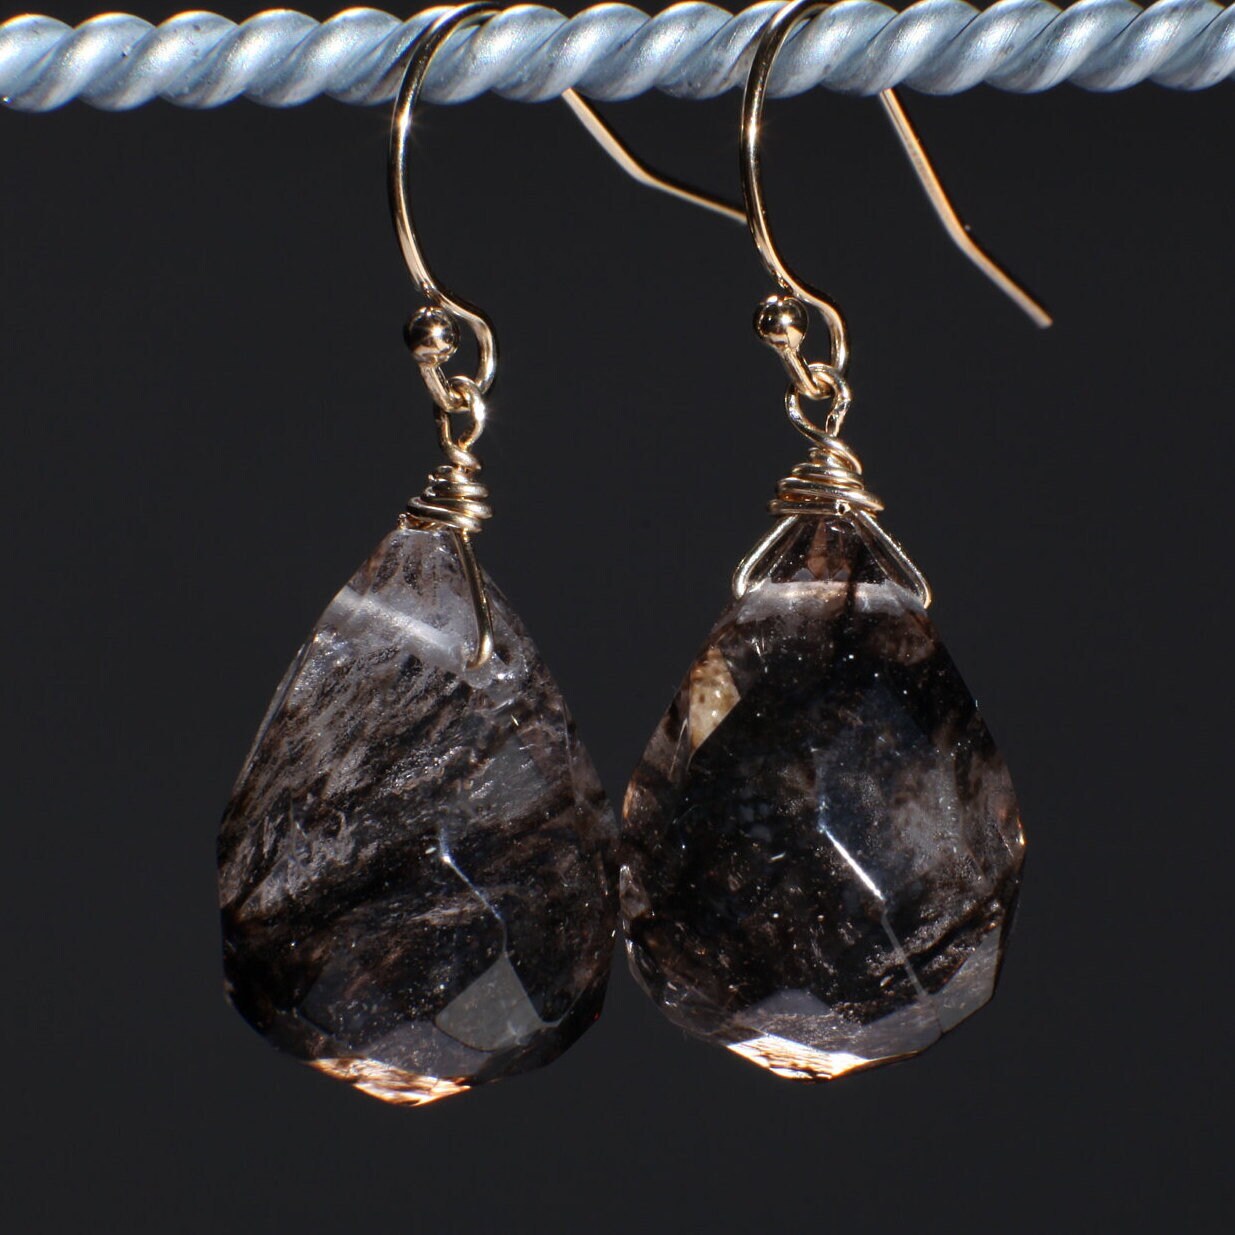 Black Rutilated Quartz Wire Wrapped 12x16mm drop in 925 Sterling Silver and 14K Gold Filled earrings in French Hook Earwire or Leverback.